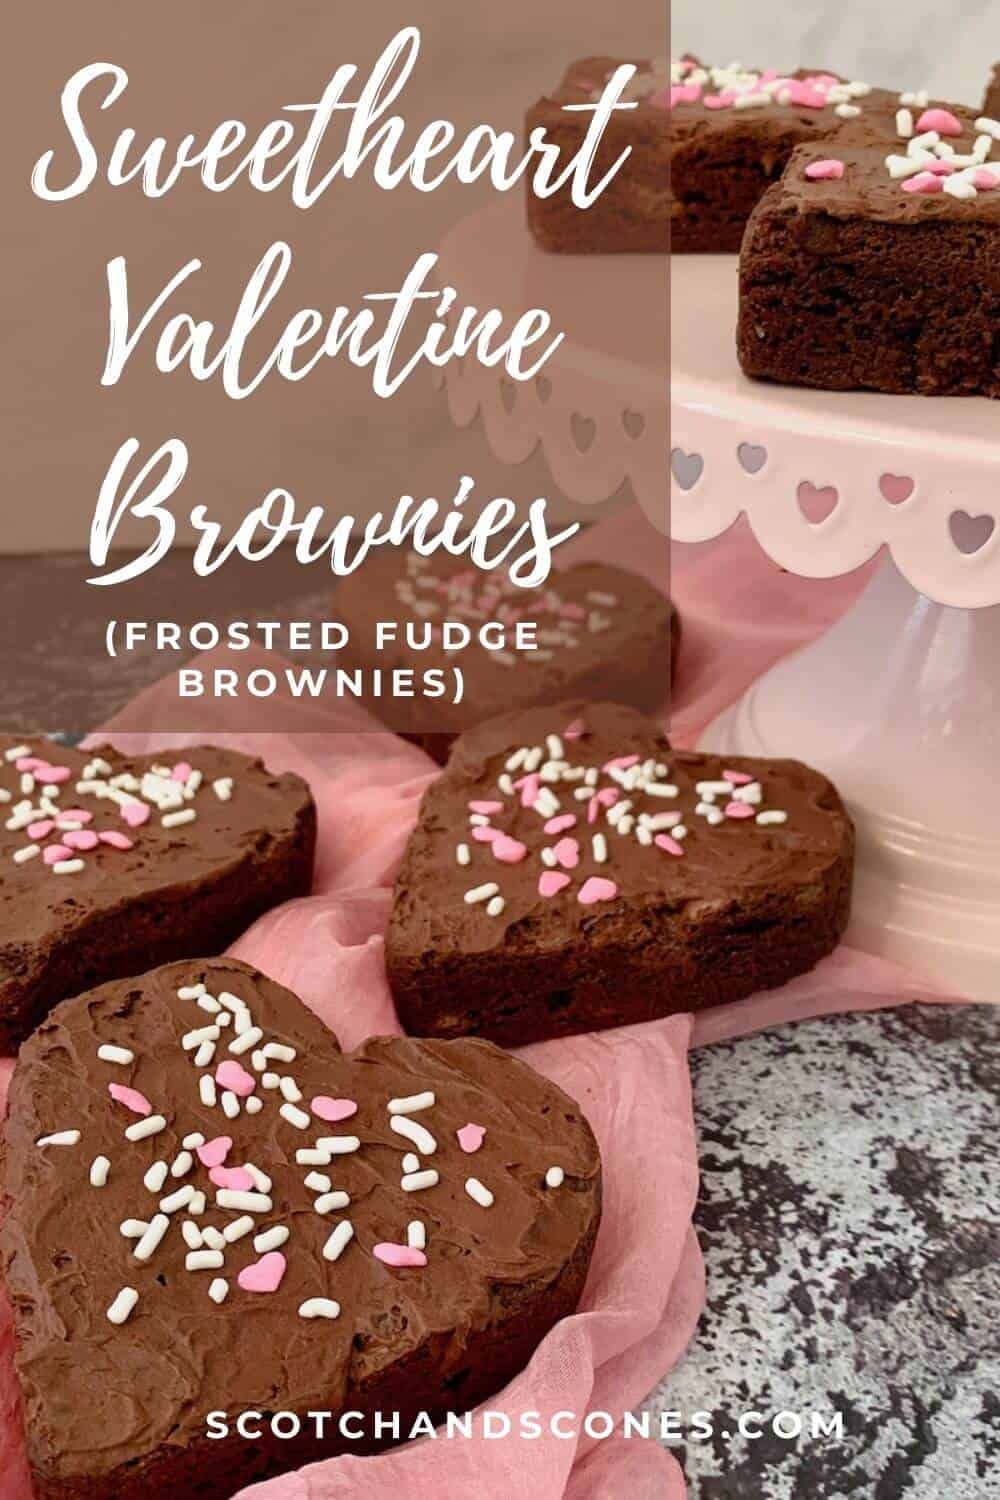 Sweetheart Valentine Frosted Fudge Brownies - Scotch & Scones